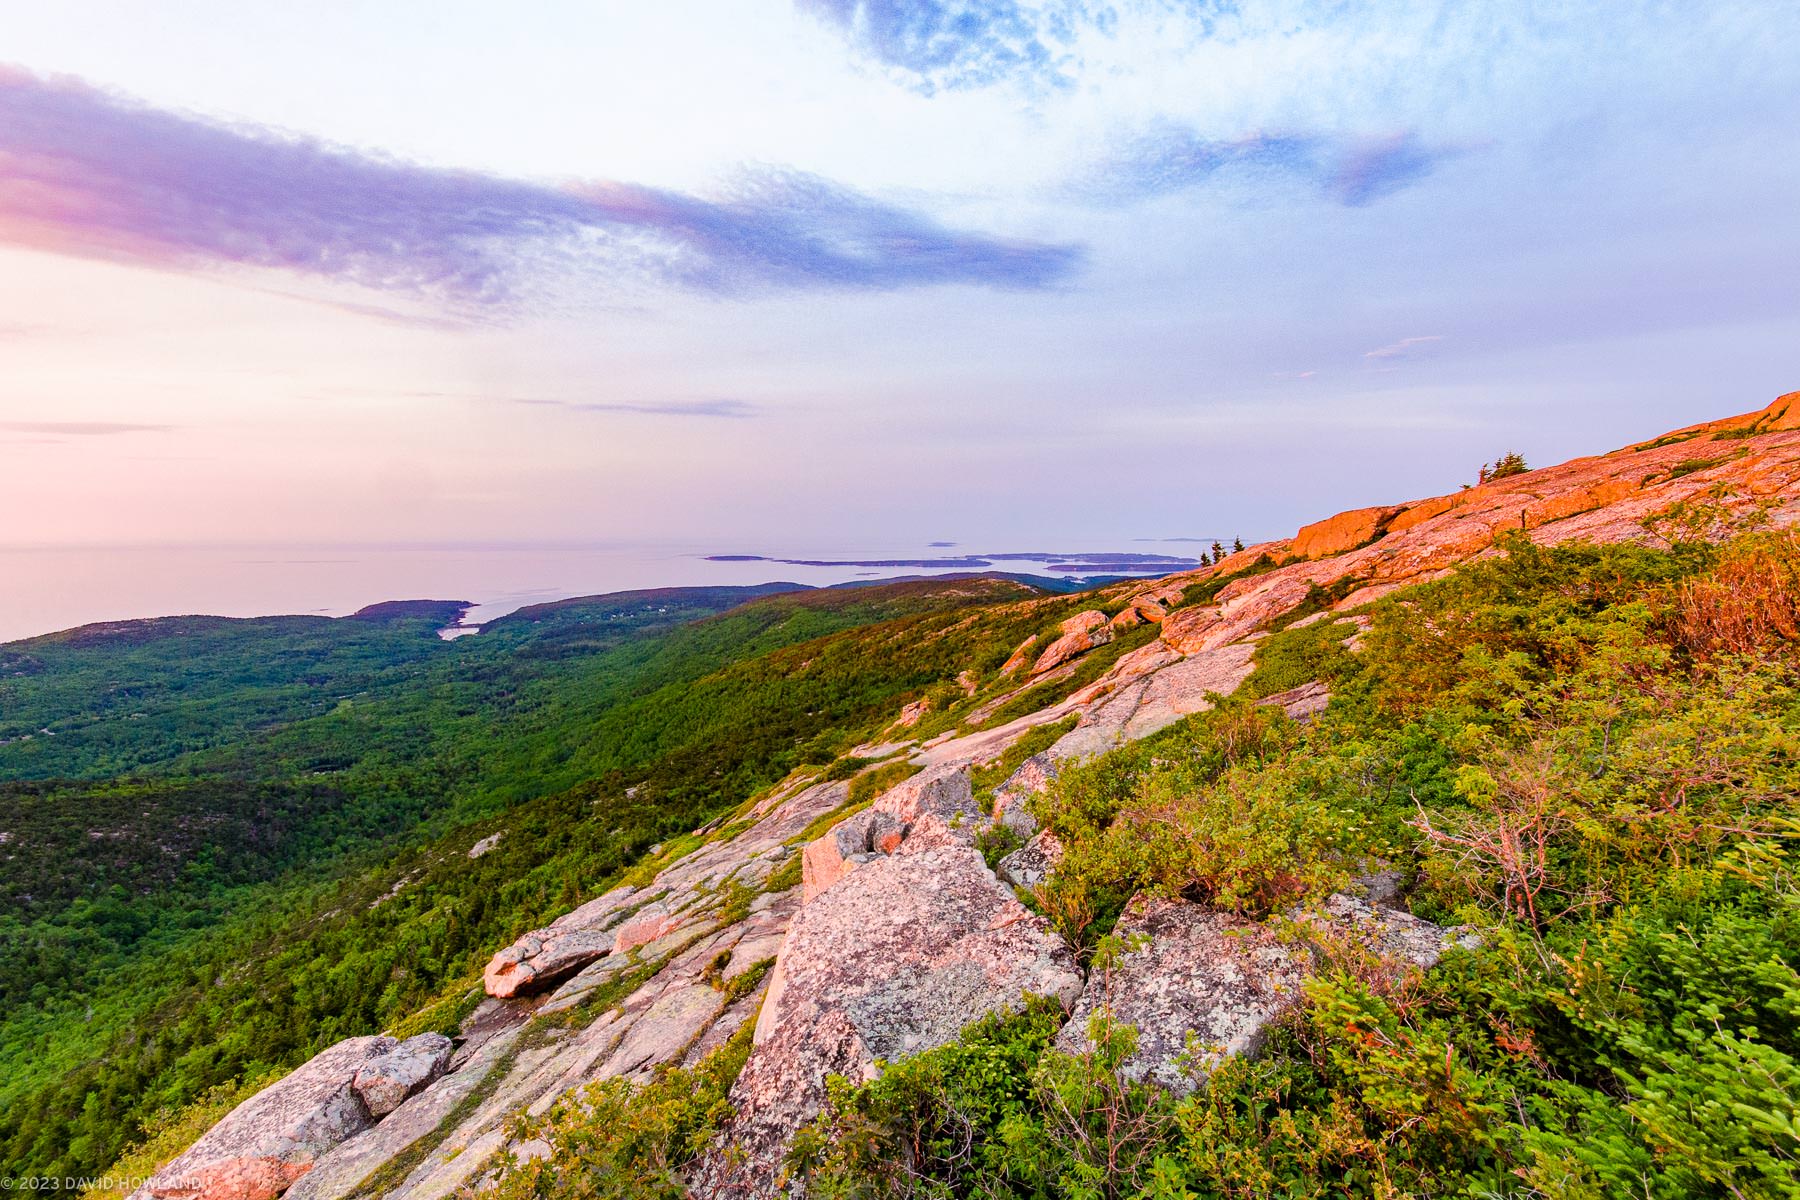 A photo of the sun rising over the the pink granite of the summit of Cadillac Mountain in Acadia National Park, Maine.